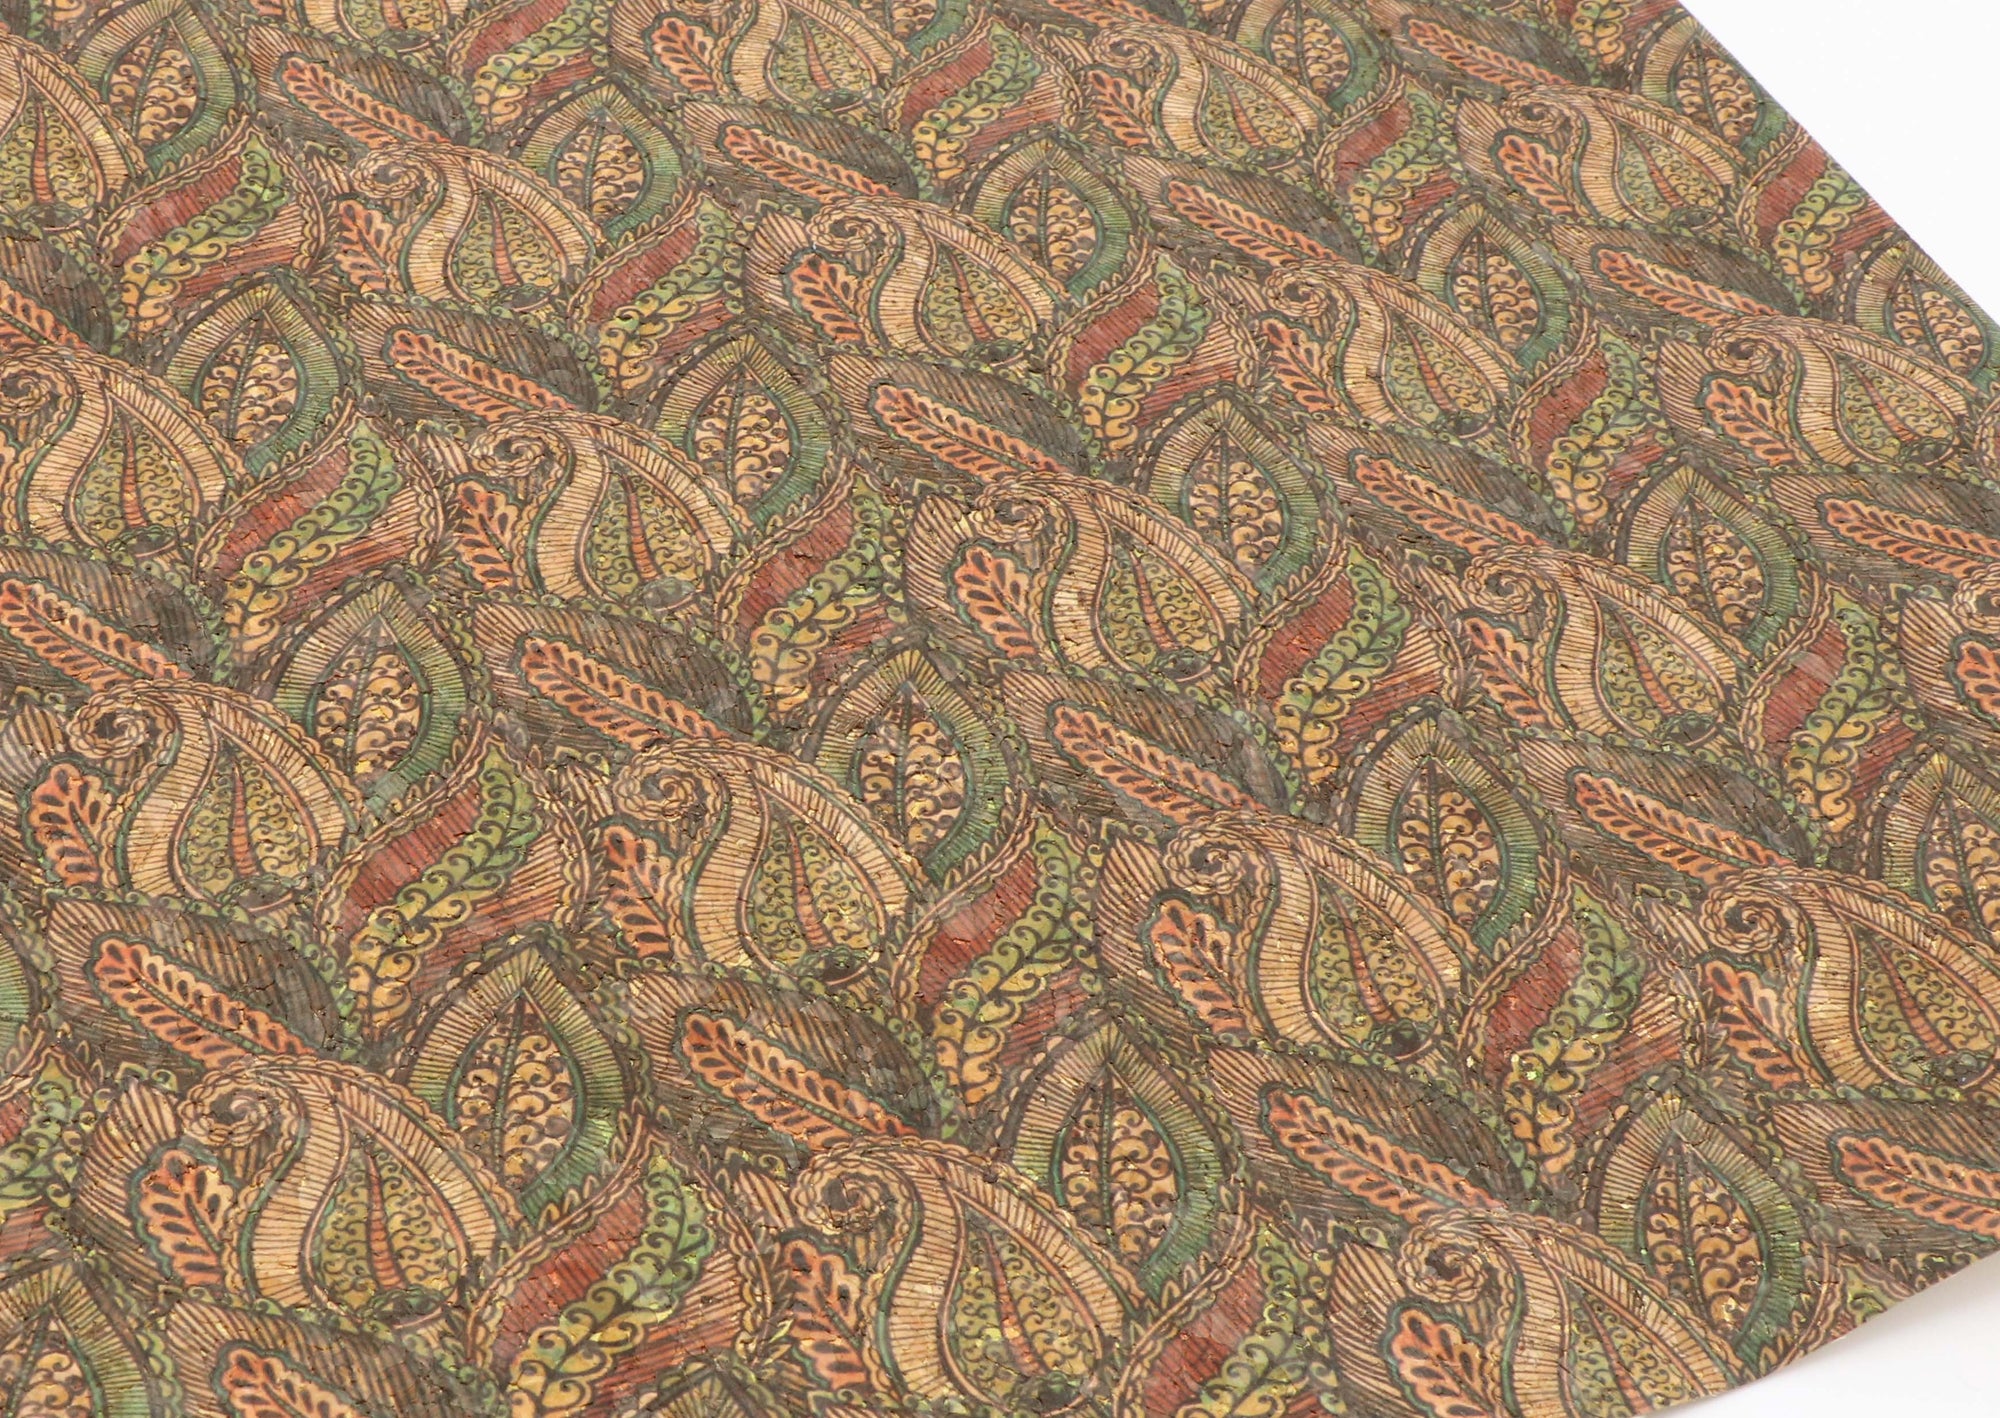 Green paisley cork fabric - piece of 18" x 15" - Colorway Arts